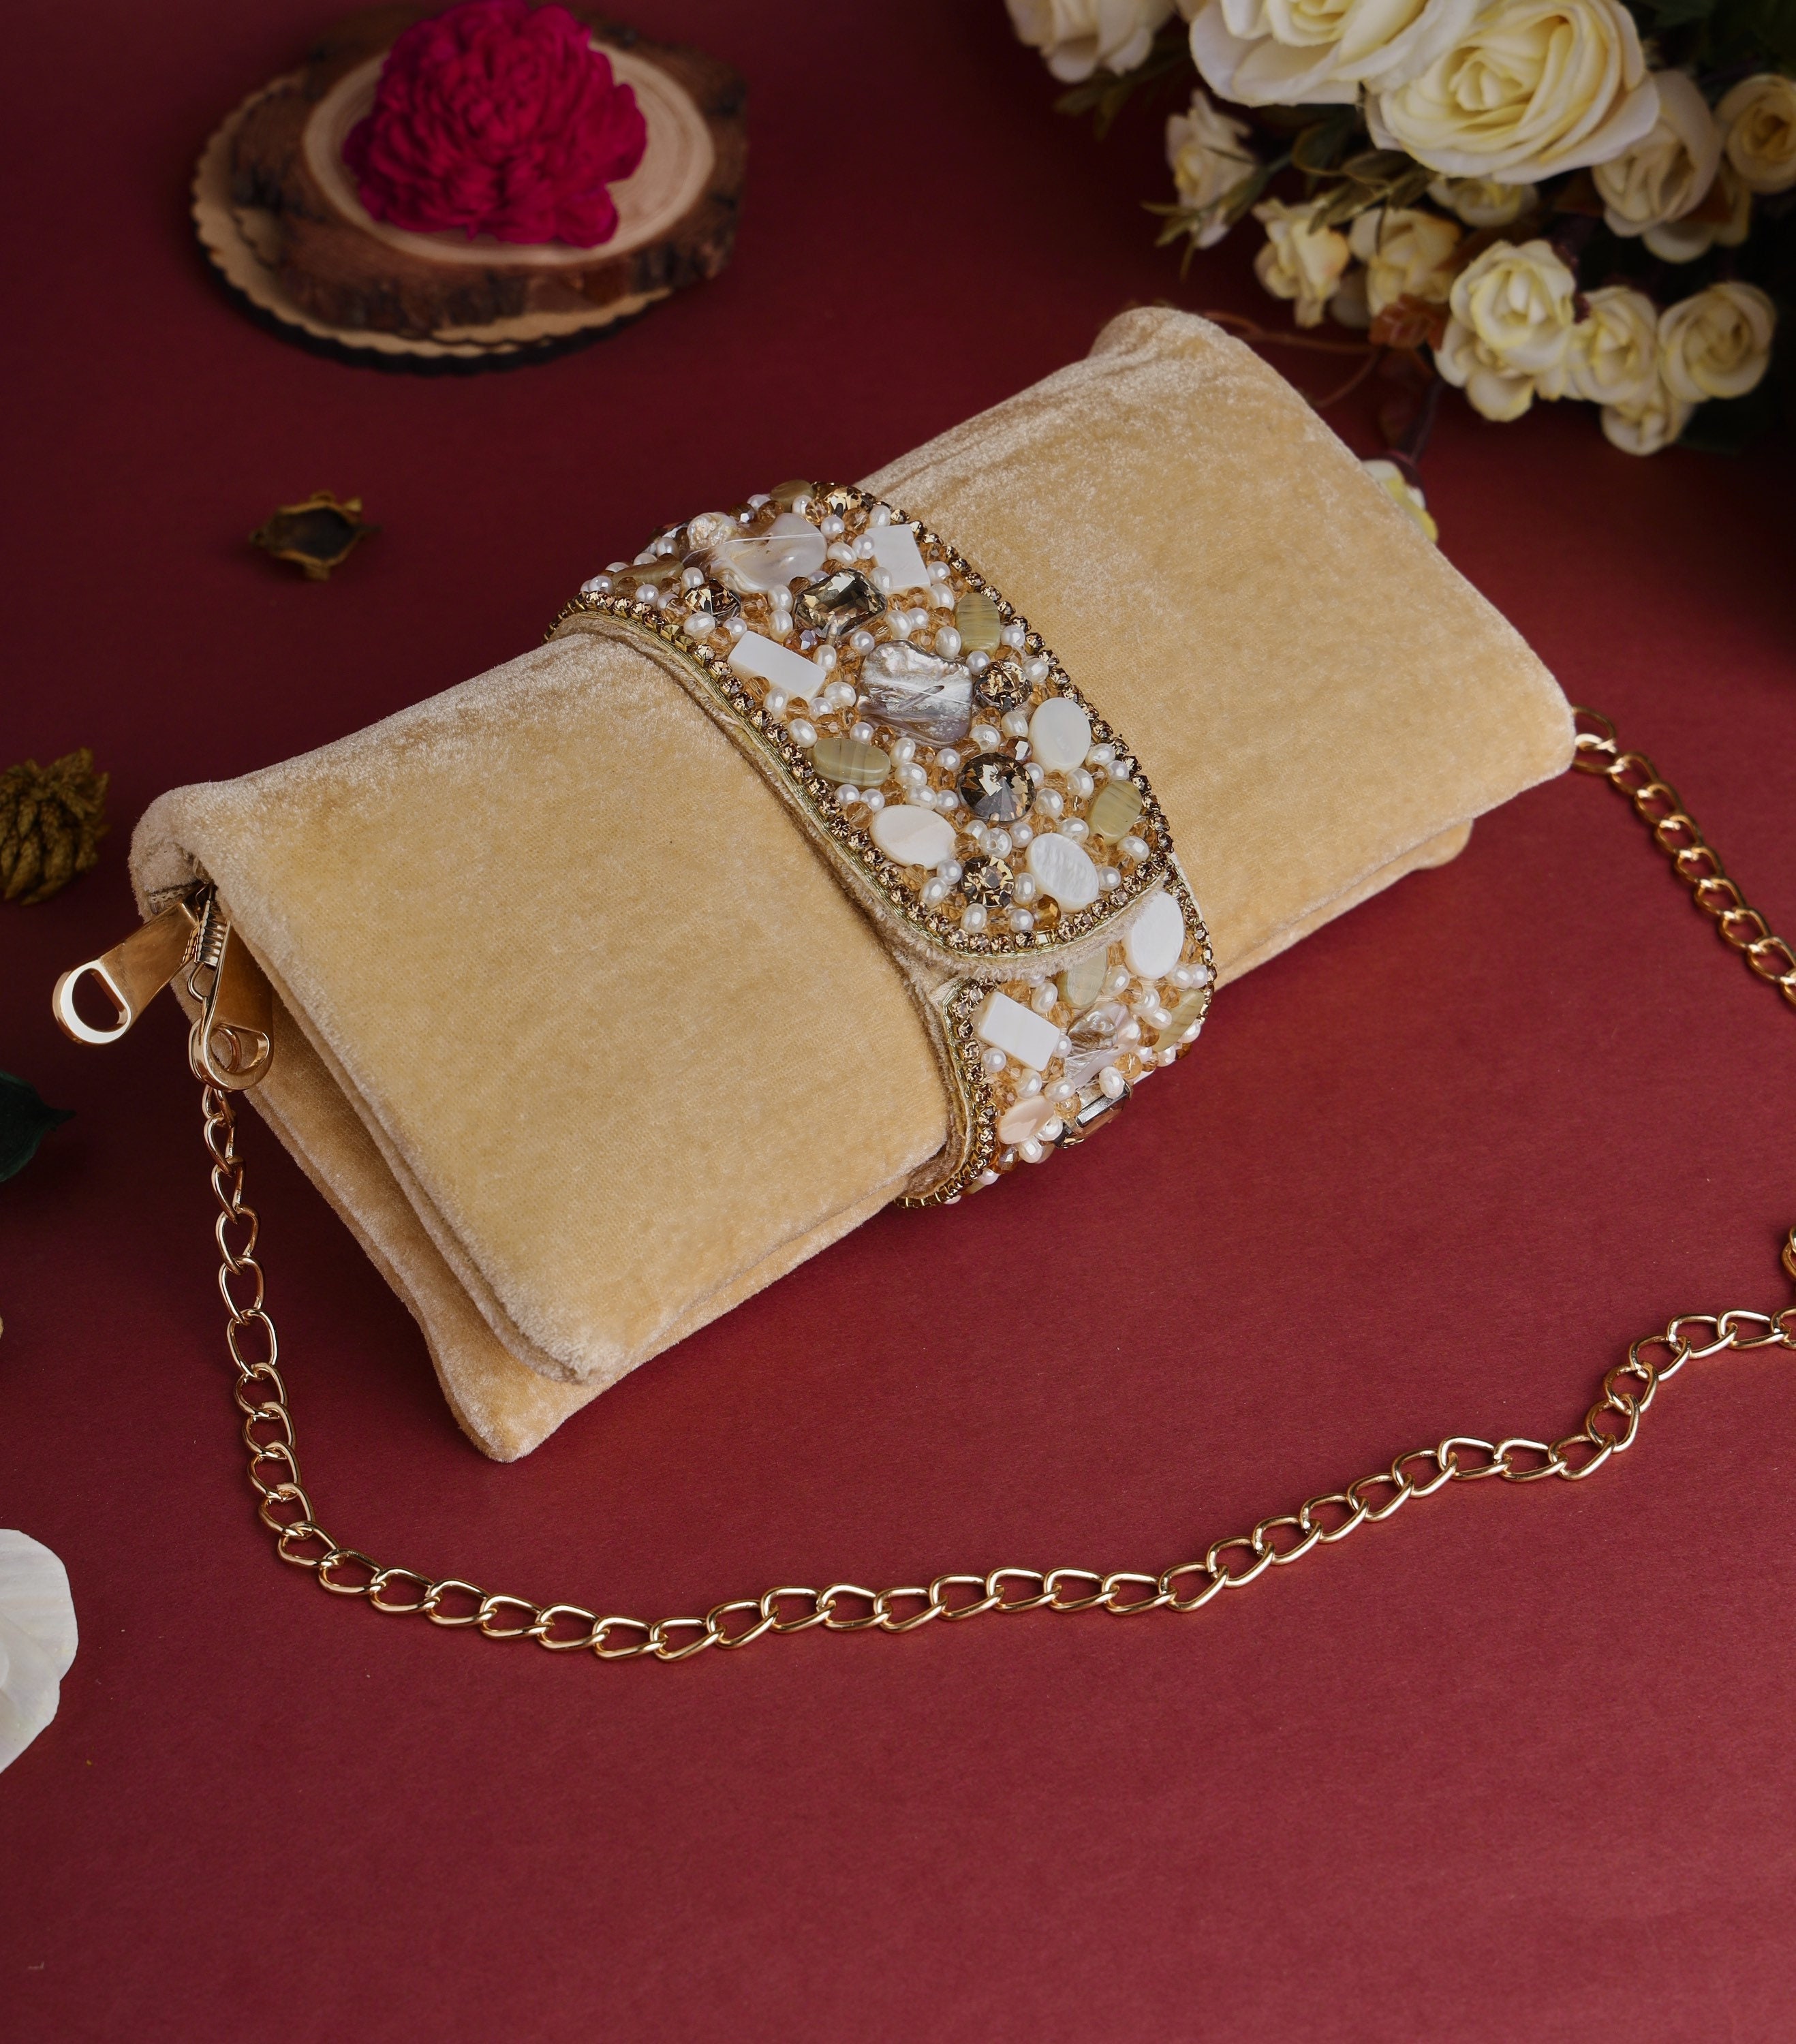 Handmade Designer Clutch Purse, Bag Shoulder Strap and Handle for Wedding, Ethnic Wear, Evening Party and Prom.